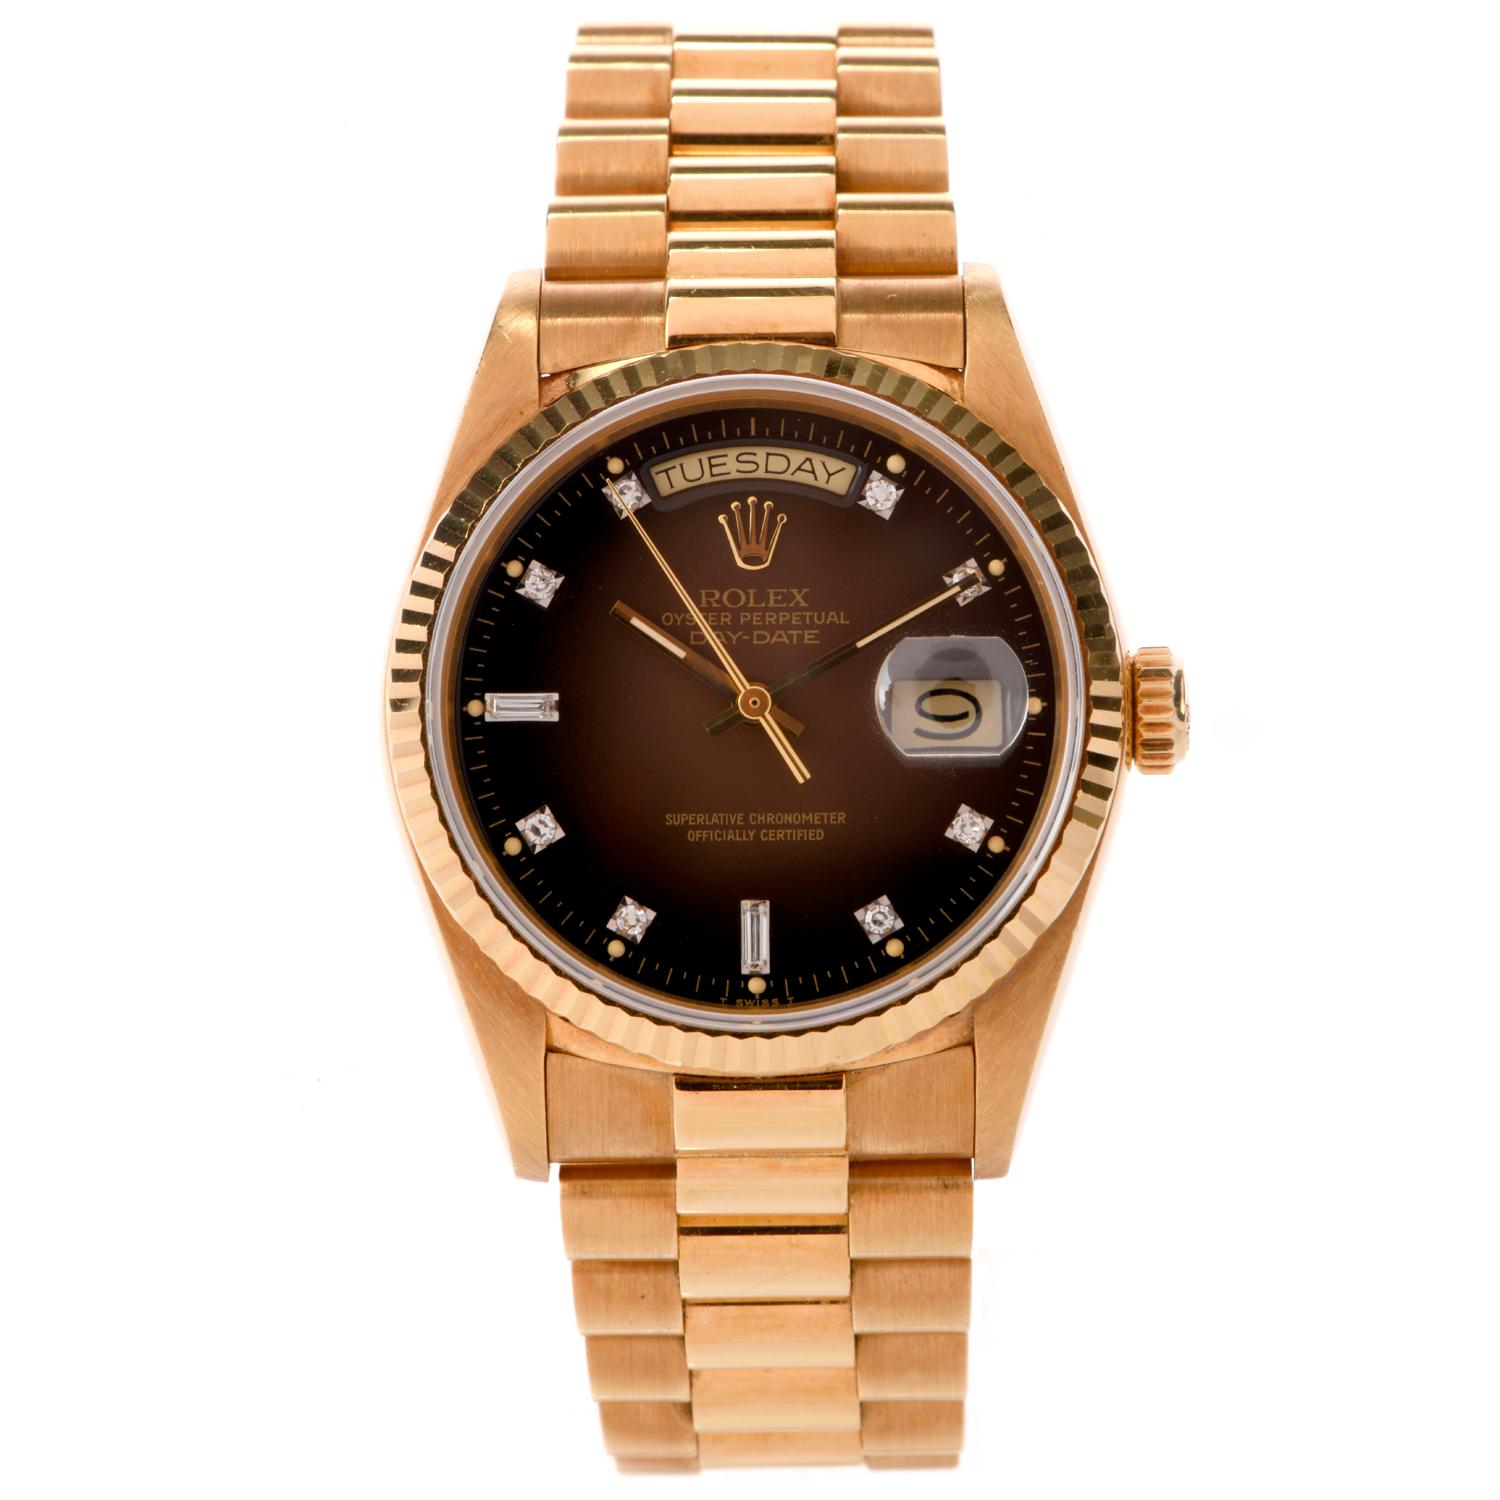 Handsome, hardly ever worn Gentlemen’s Rolex President Day Date watch, Ref 18038 dated late 1986.It is crafted in 18k yellow gold. Featuring All Original scratch resistant Sapphire Crystal, 
rare specialty brown with original factory Diamond Dial,